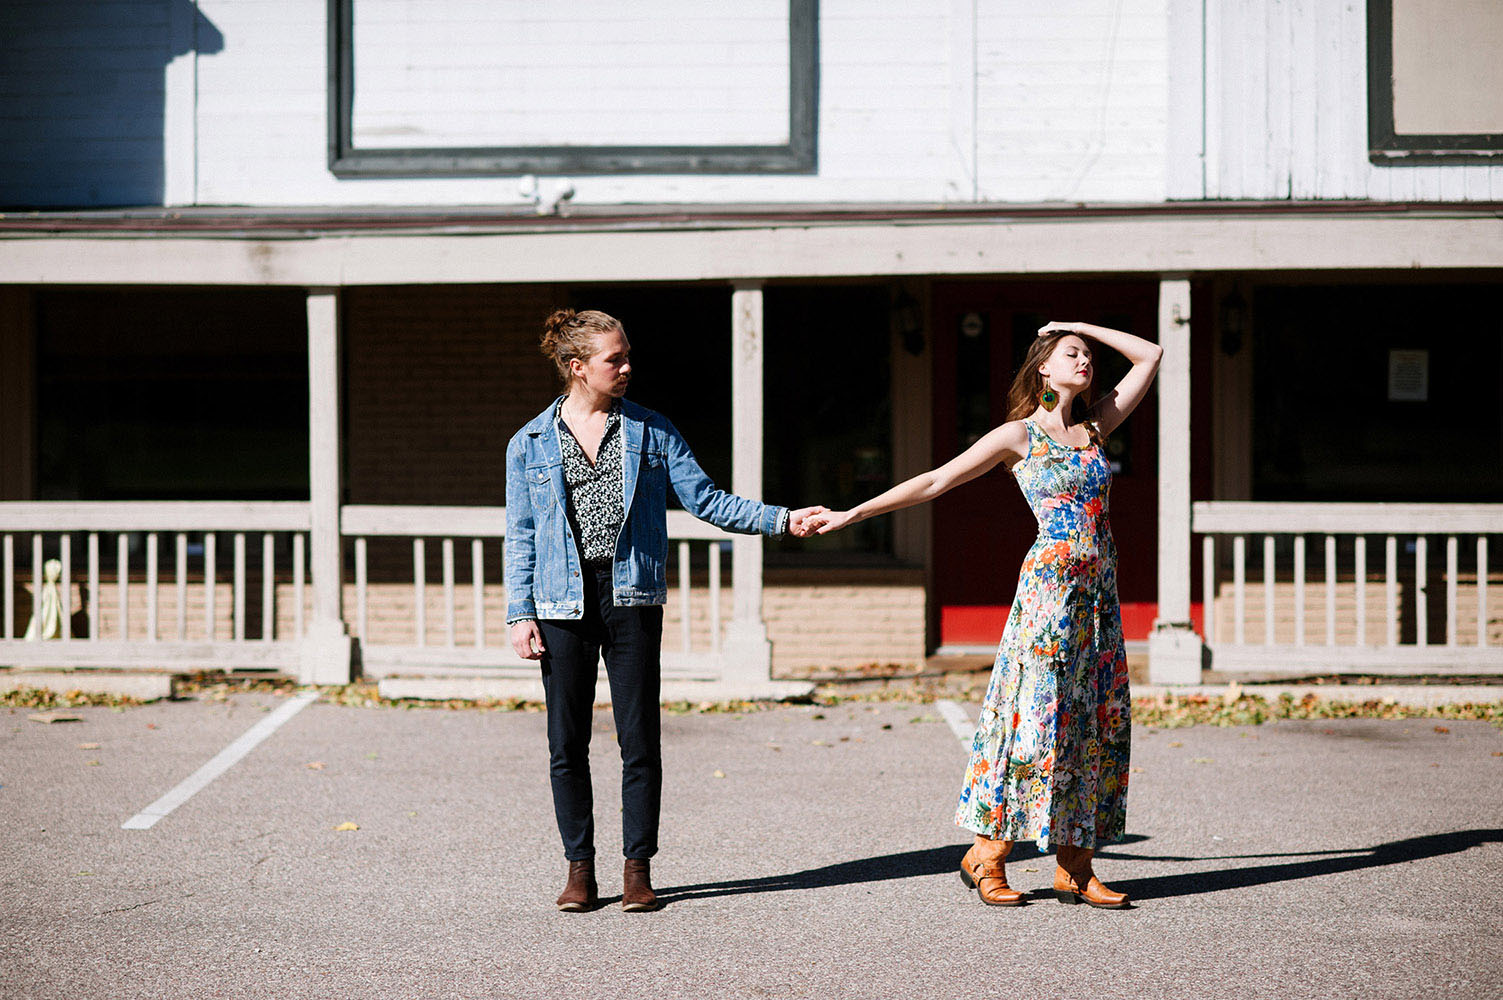 male with man bun and jean jacket and woman in long floral print dress, cowboy boots and peacock feather earrings in front of old Western building